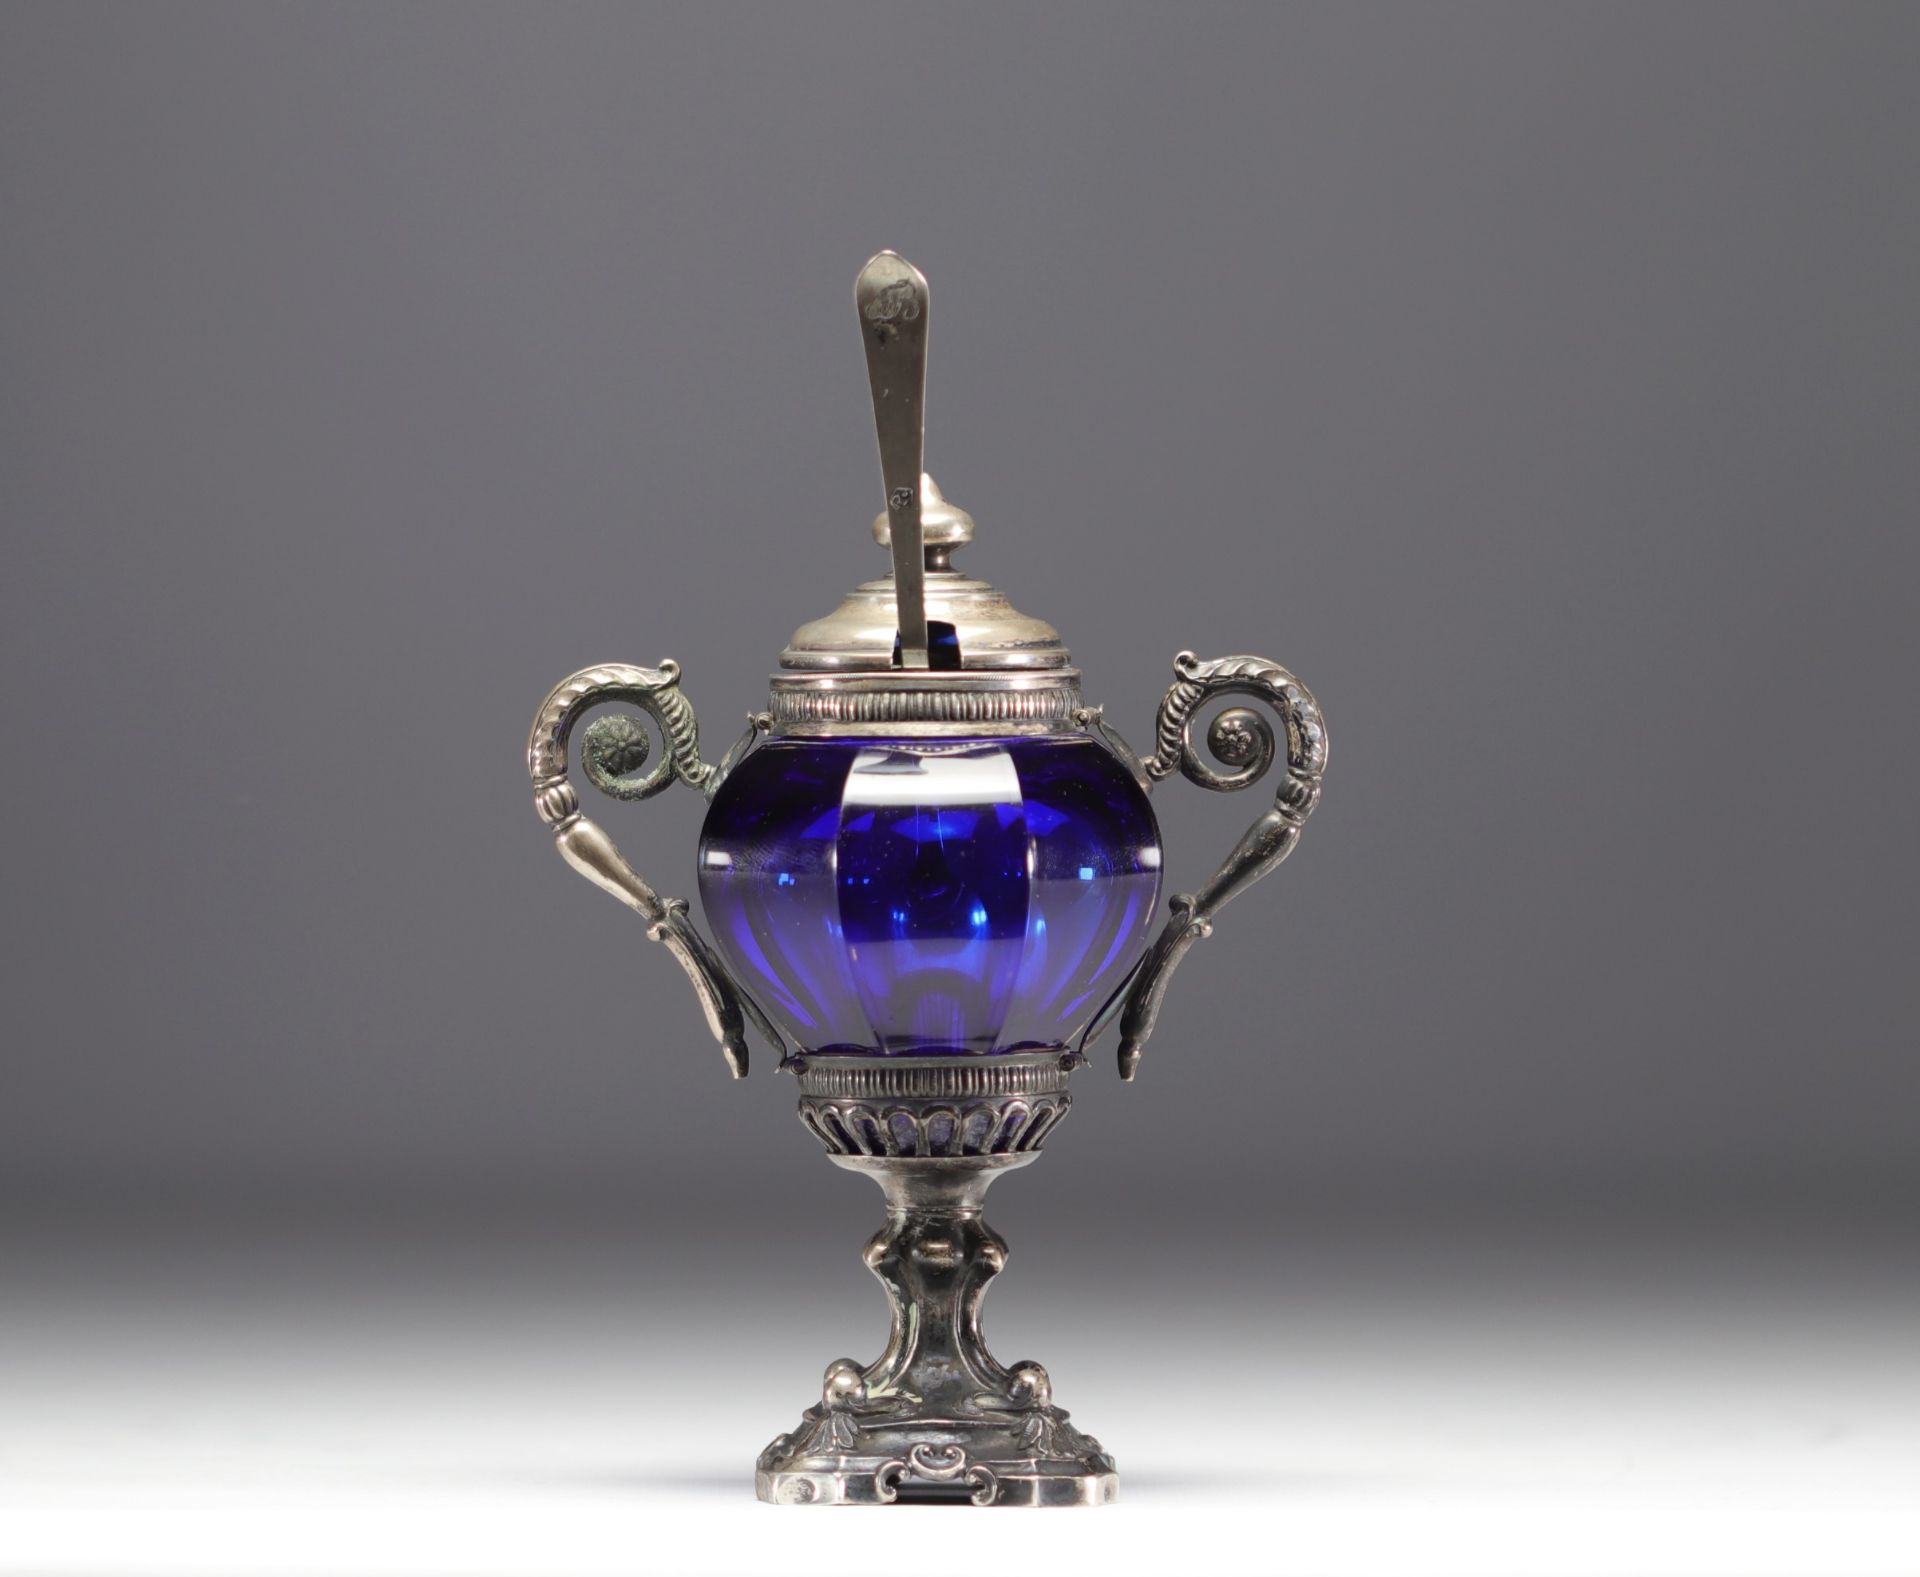 Solid silver mustard pot, blue glassware, hallmarks at the base of the frame.